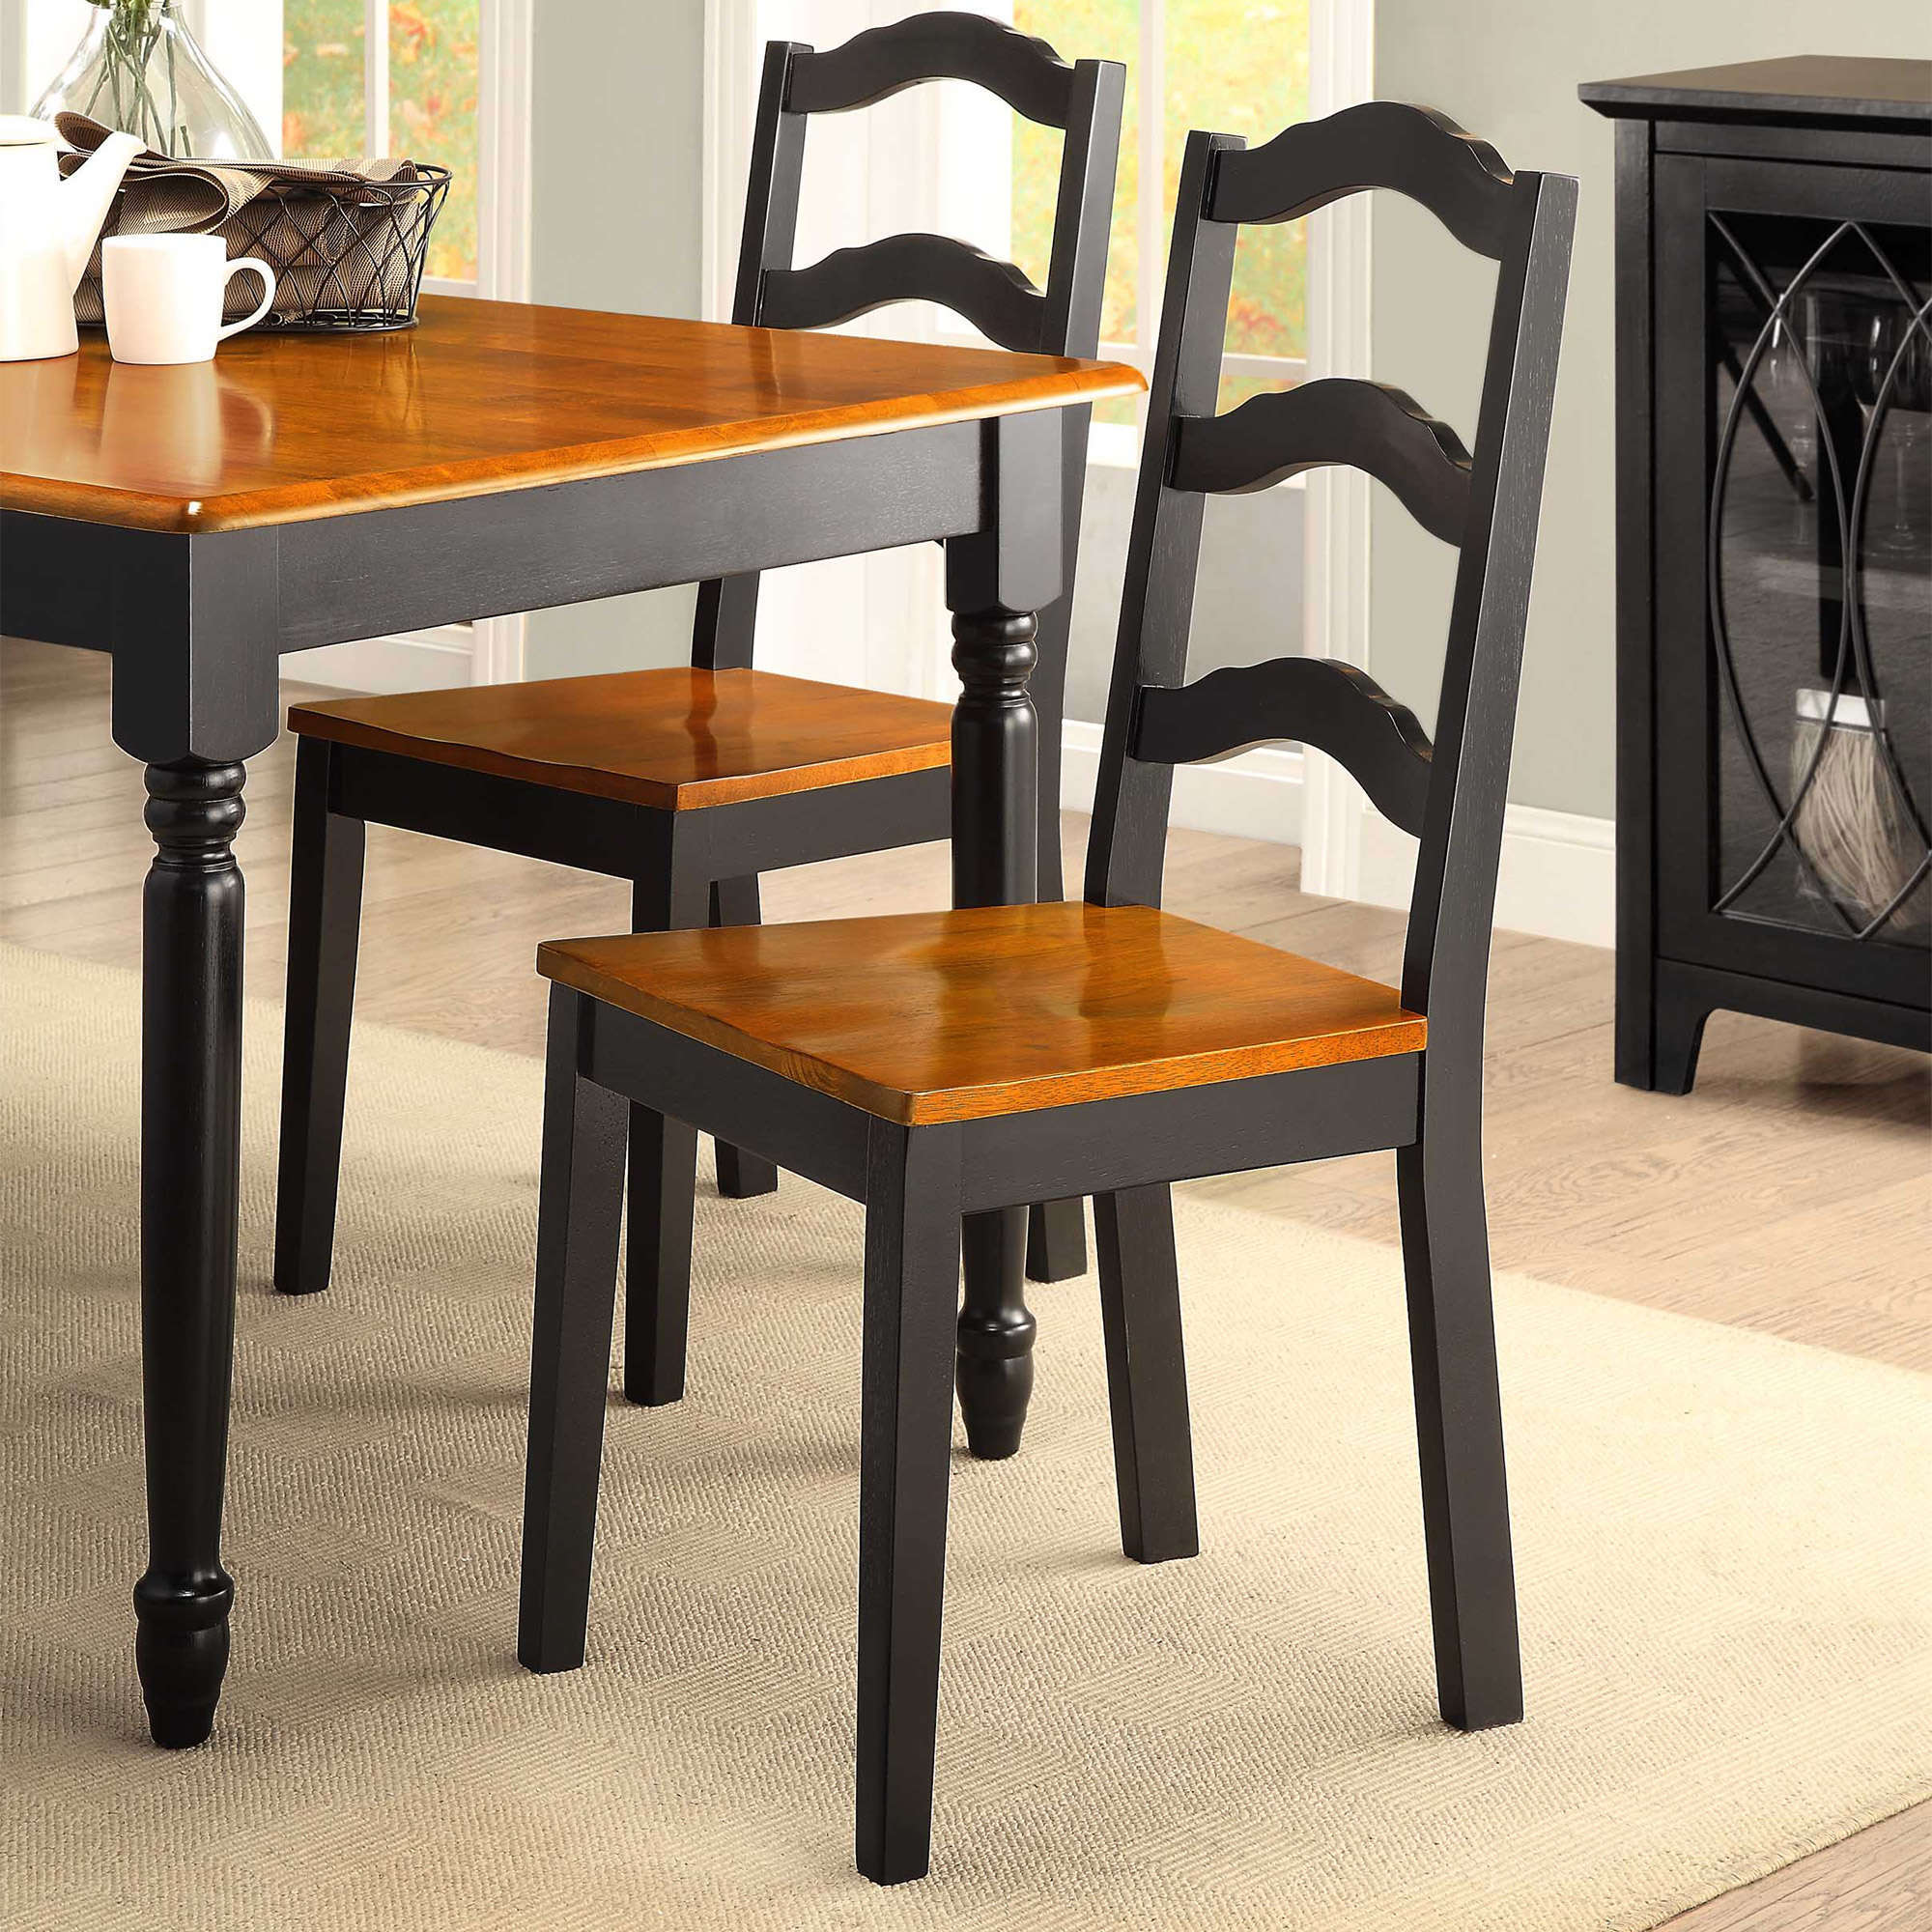 Better Homes and Gardens Autumn Lane Ladder Back Dining Chairs, Set of 2, Black and Oak - image 2 of 2